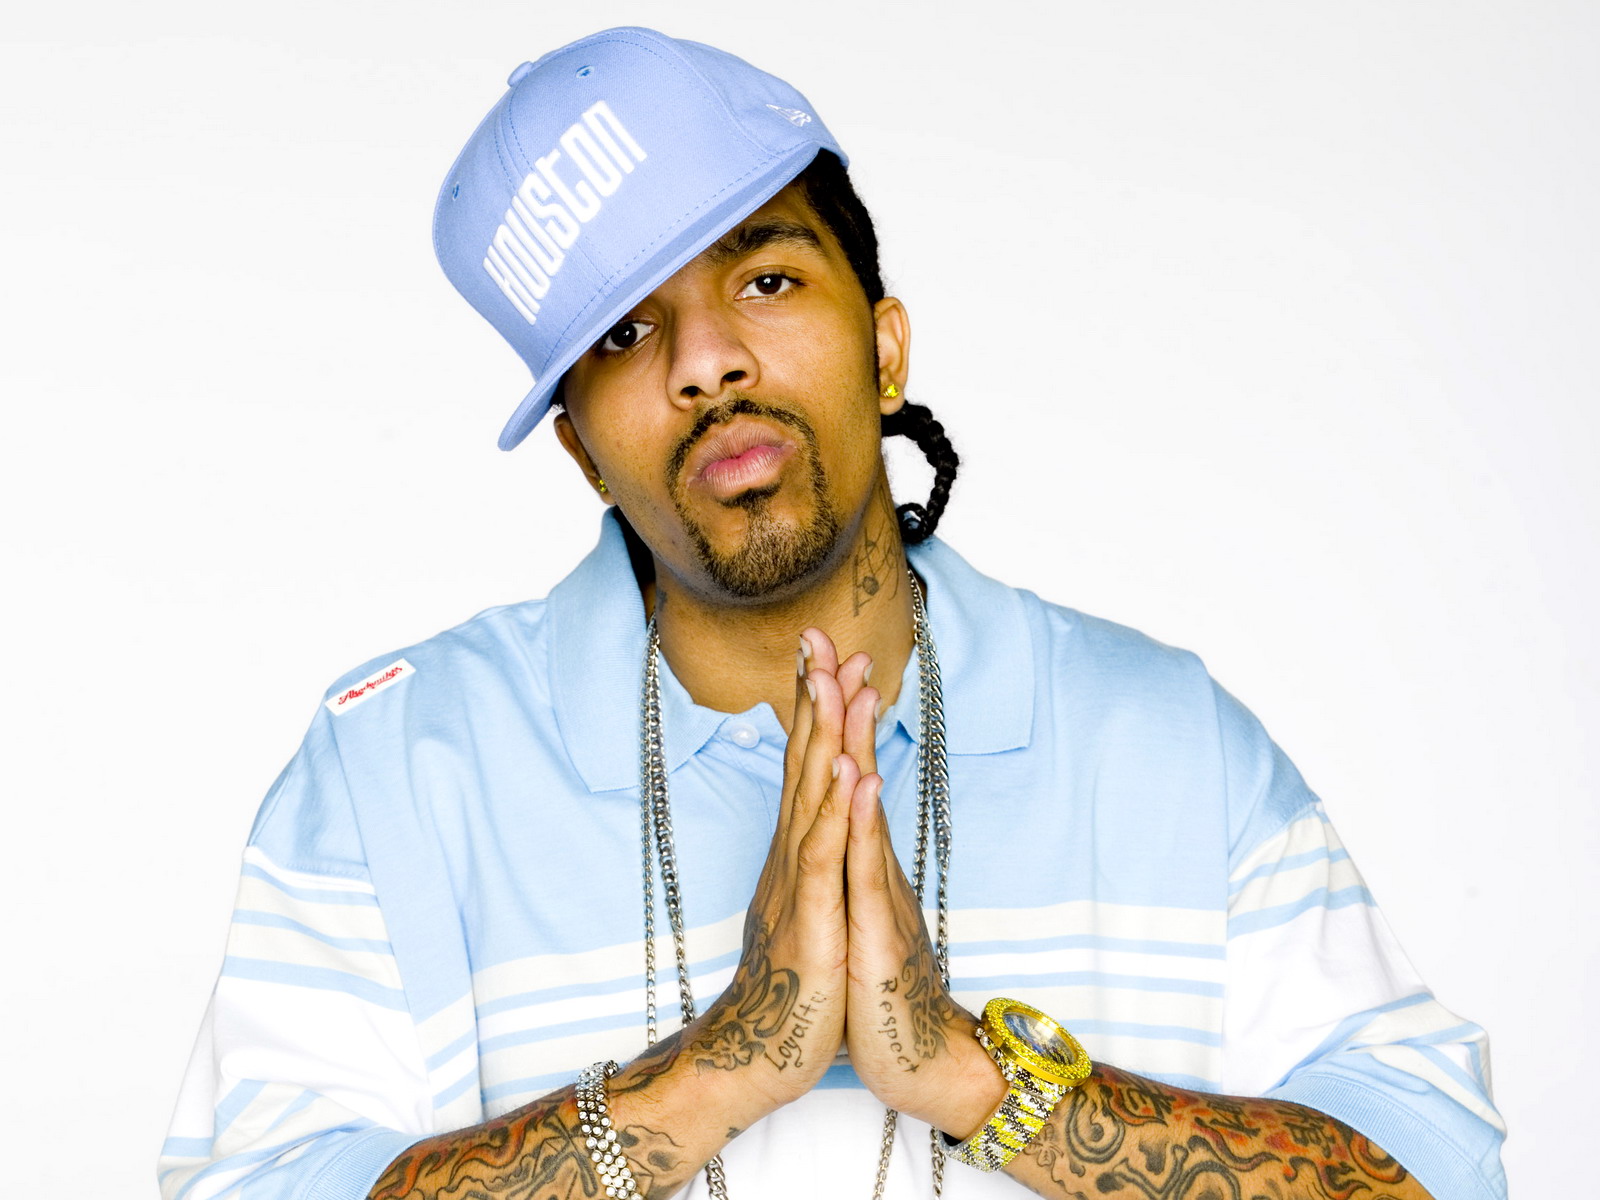 How many albums did Lil Flip sell?